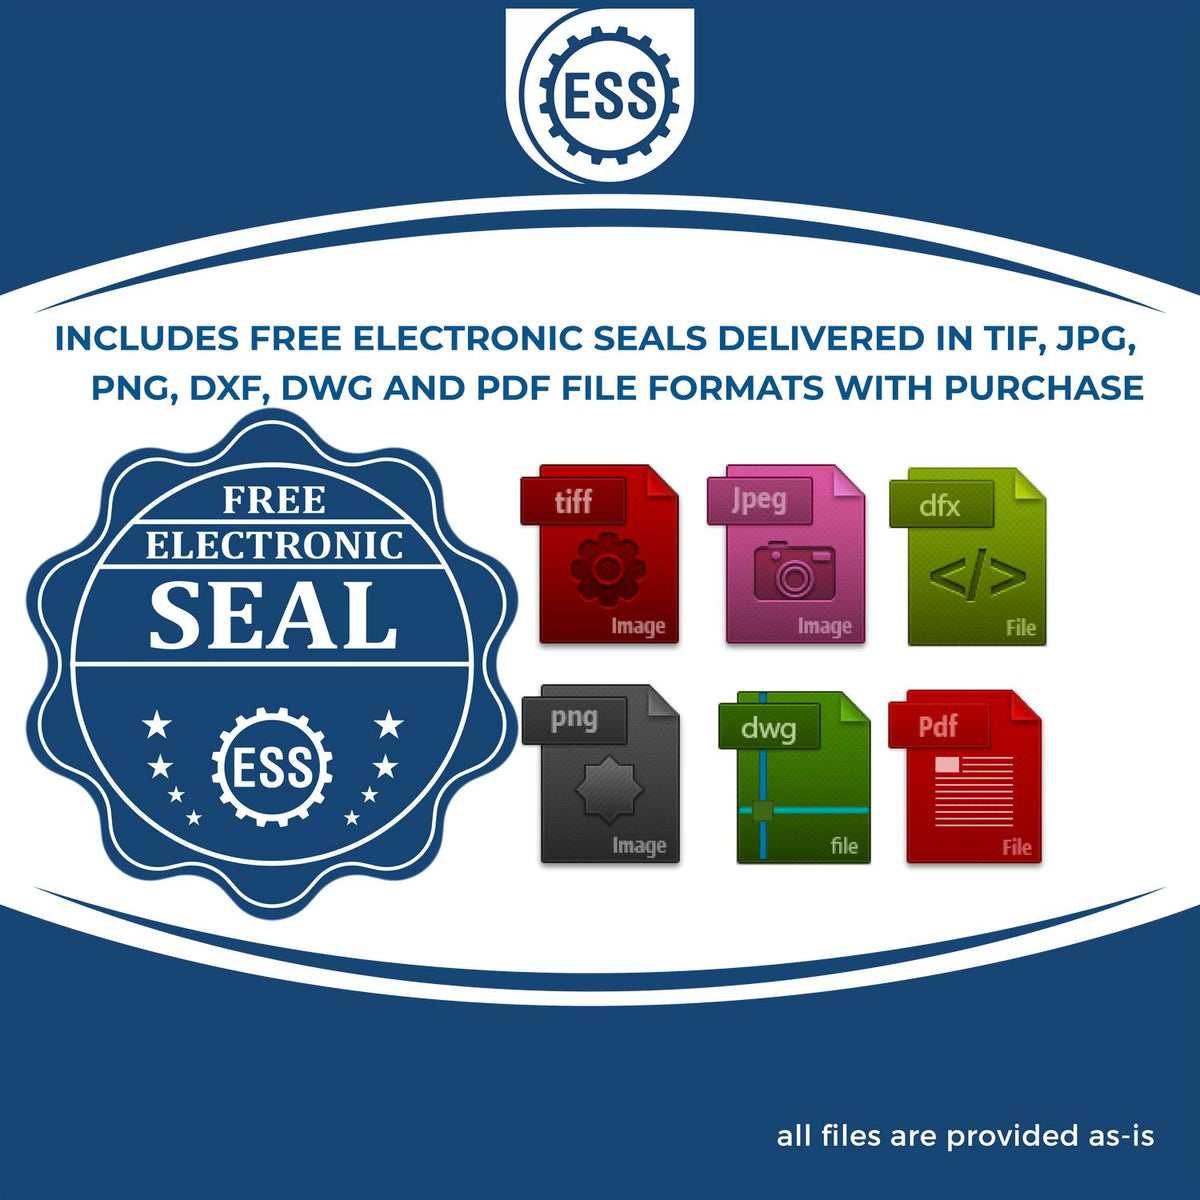 An infographic for the free electronic seal for the Hybrid Virginia Geologist Seal illustrating the different file type icons such as DXF, DWG, TIF, JPG and PNG.